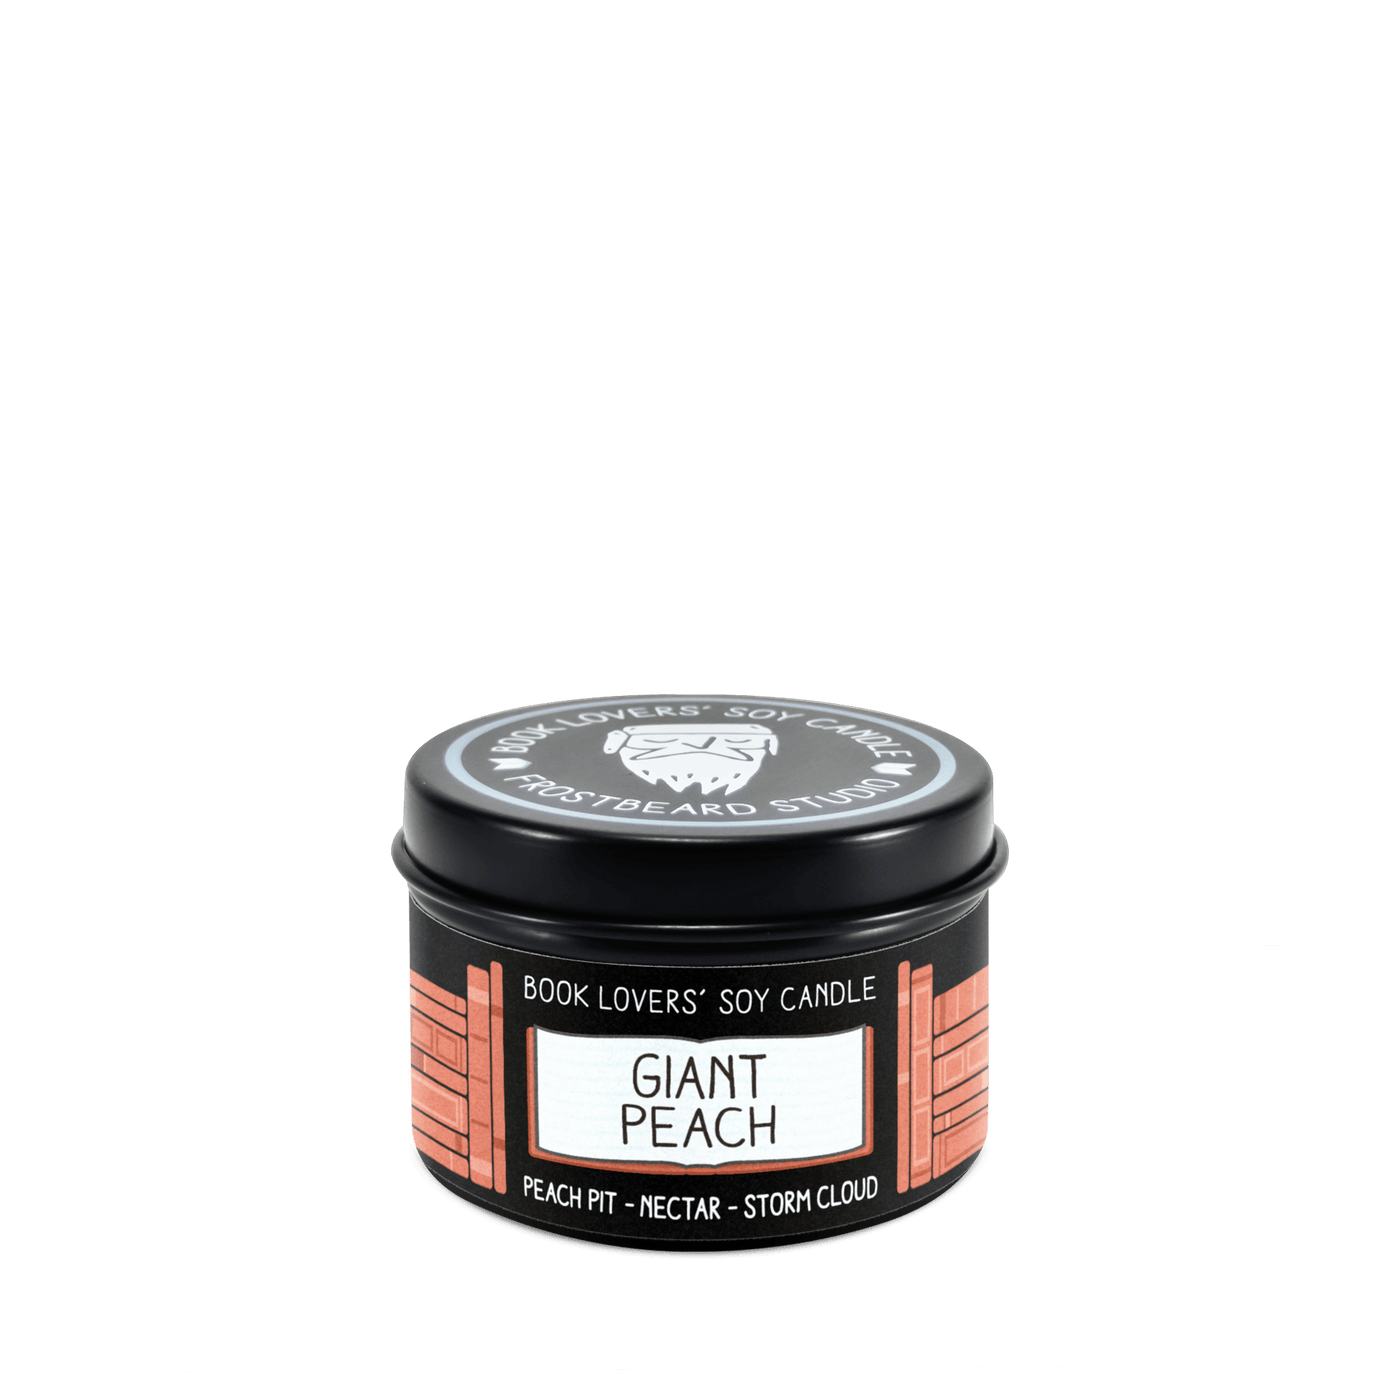 Giant Peach  -  2 oz Tin  -  Book Lovers' Soy Candle  -  Frostbeard Studio